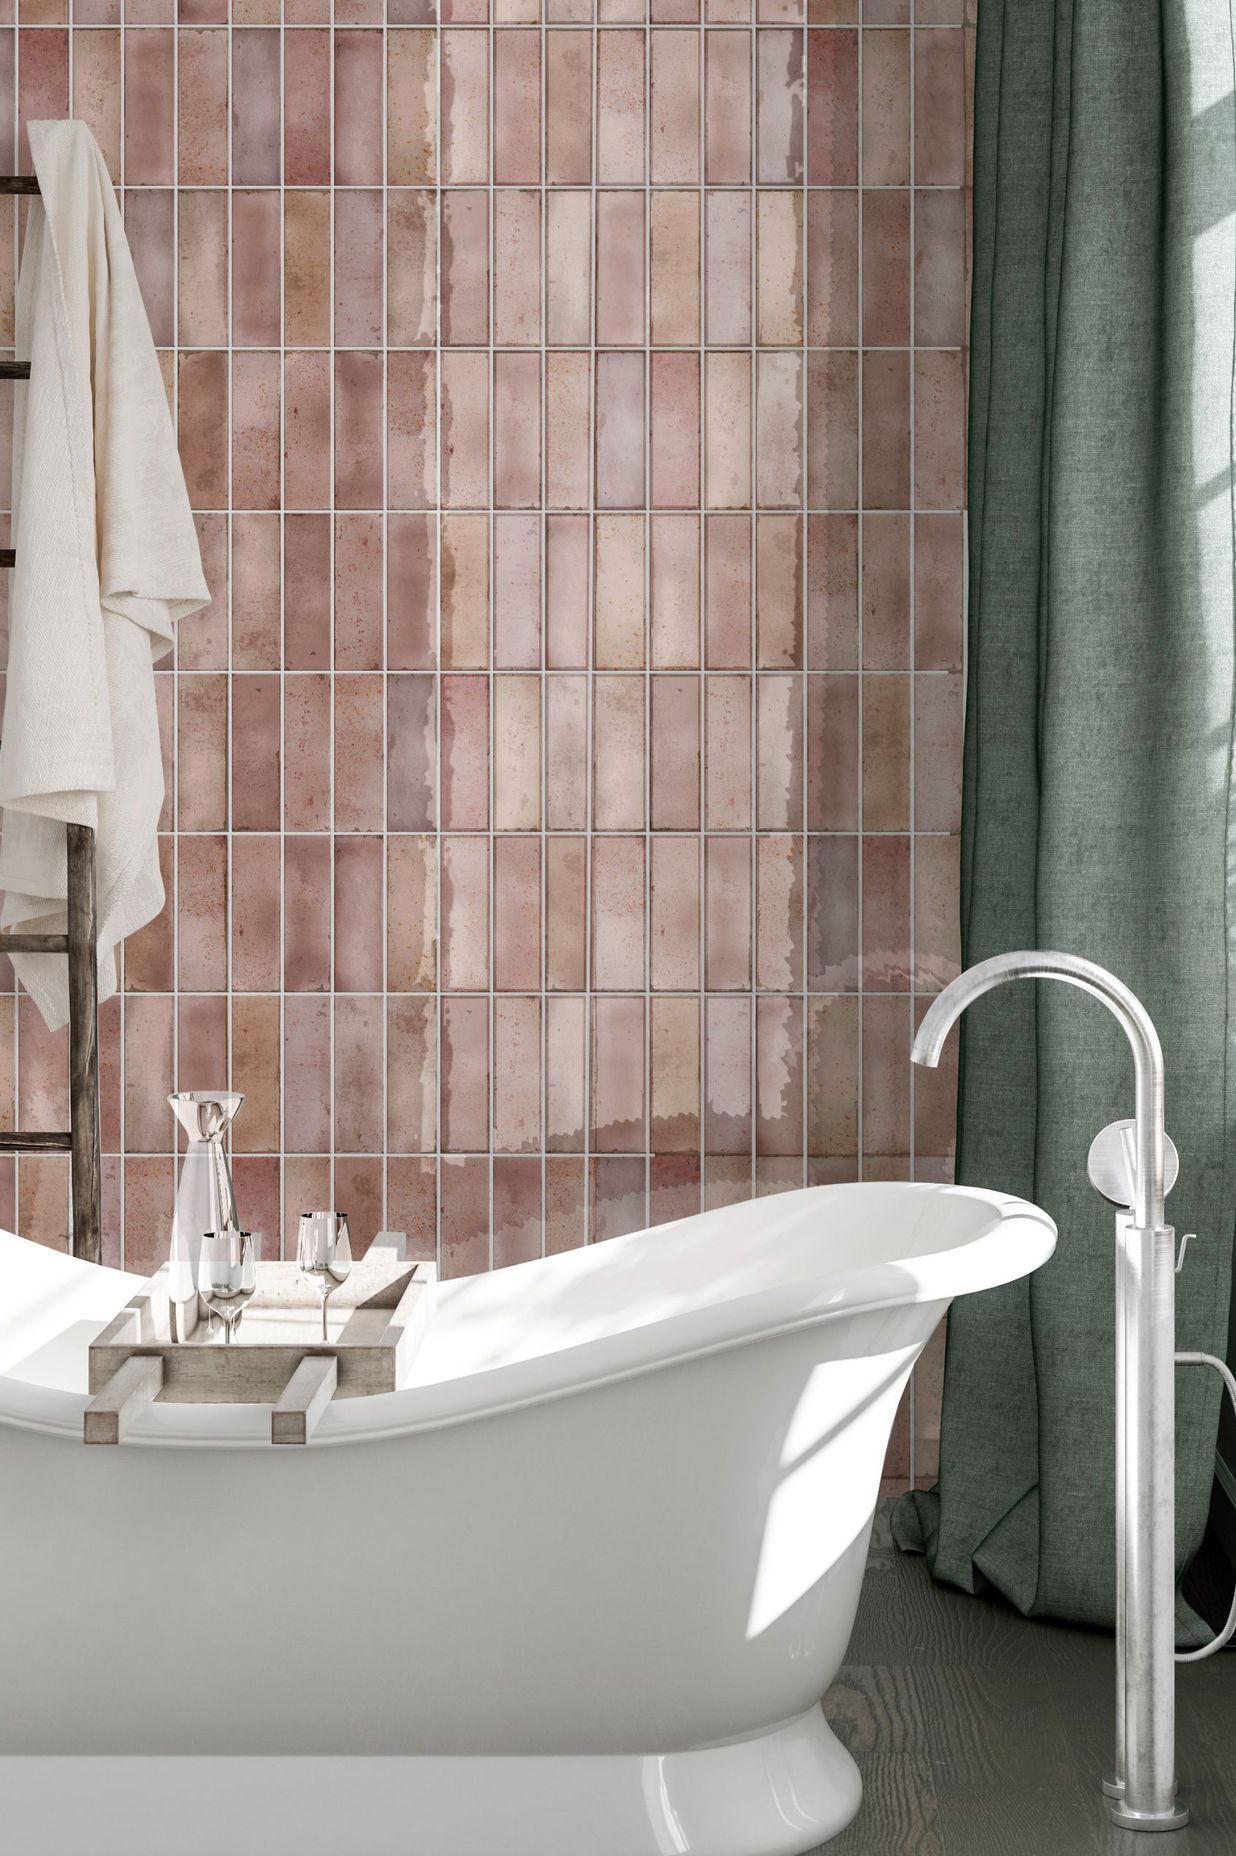 How to use tiles to bring a sense of European style to your home